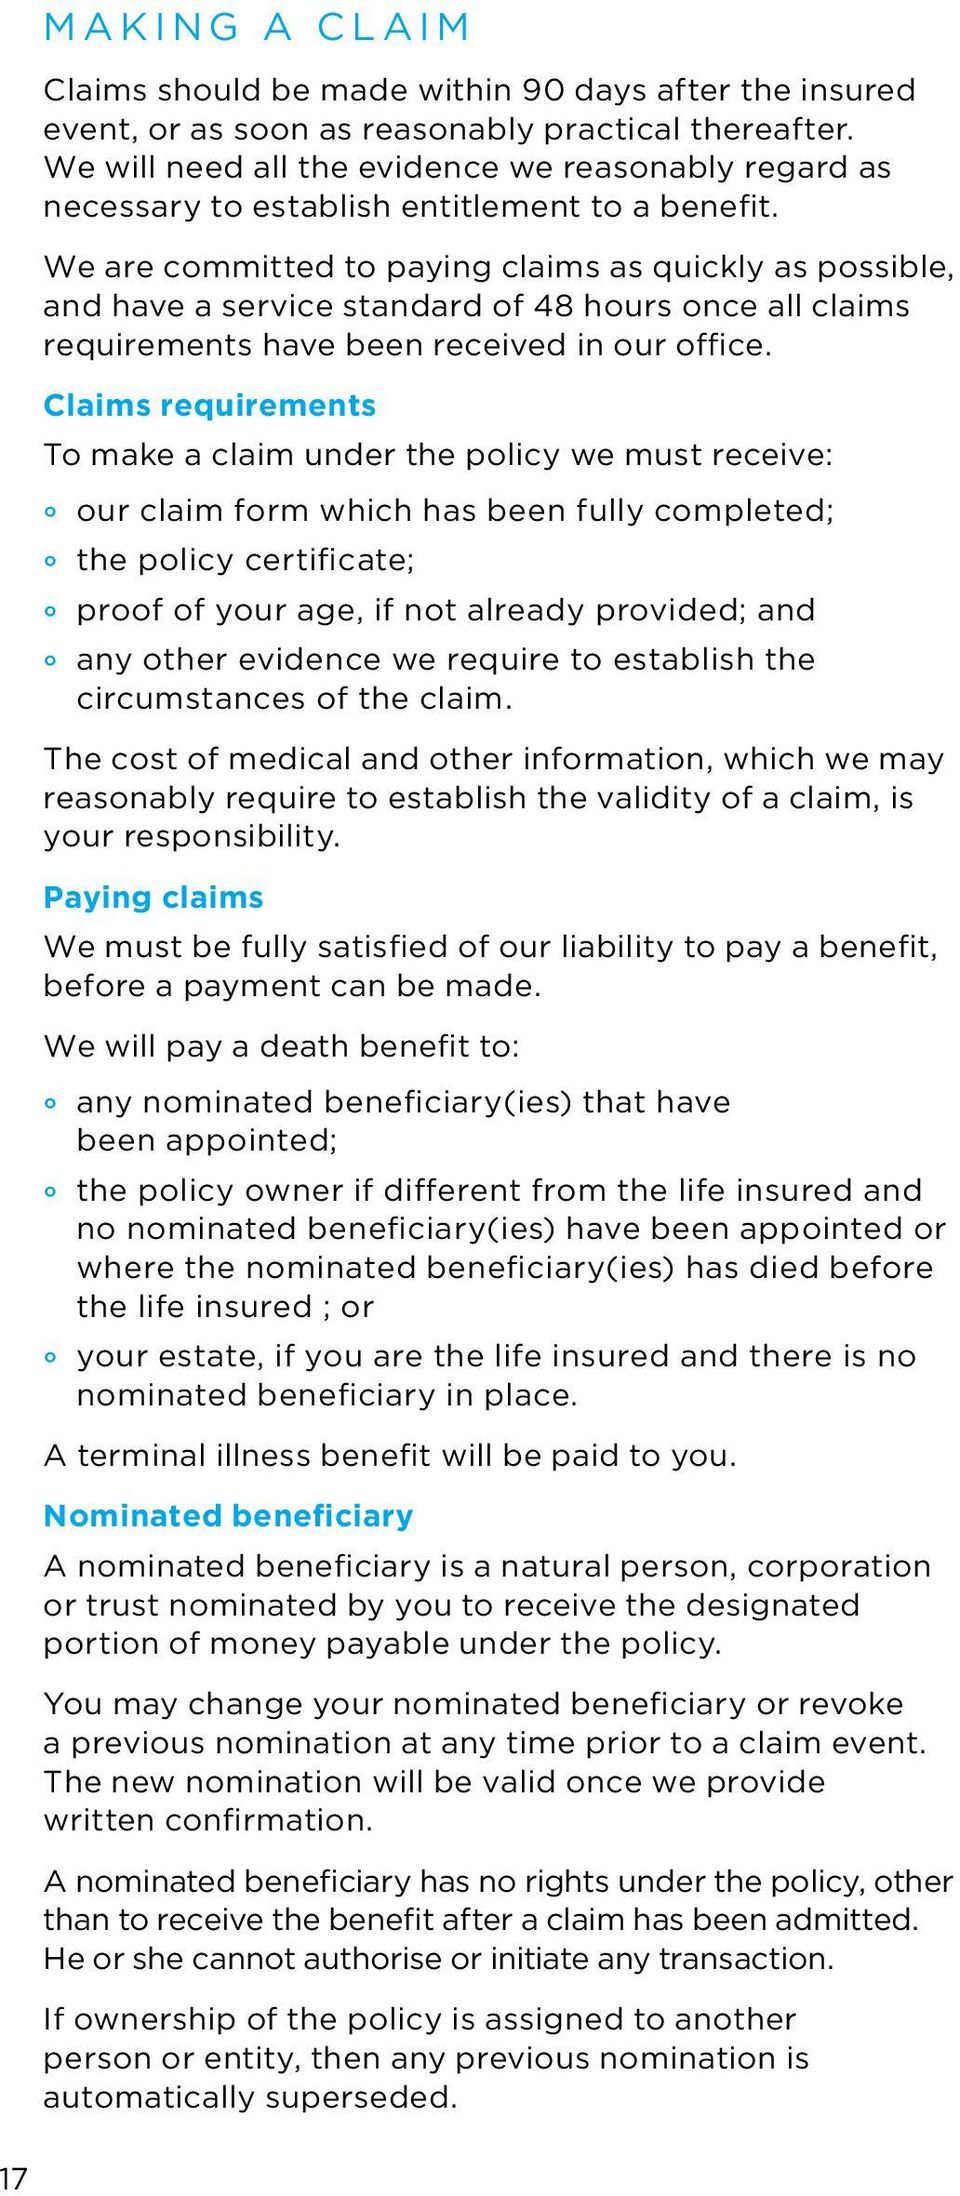 We are committed to paying claims as quickly as possible, and have a service standard of 48 hours once all claims requirements have been received in our office.